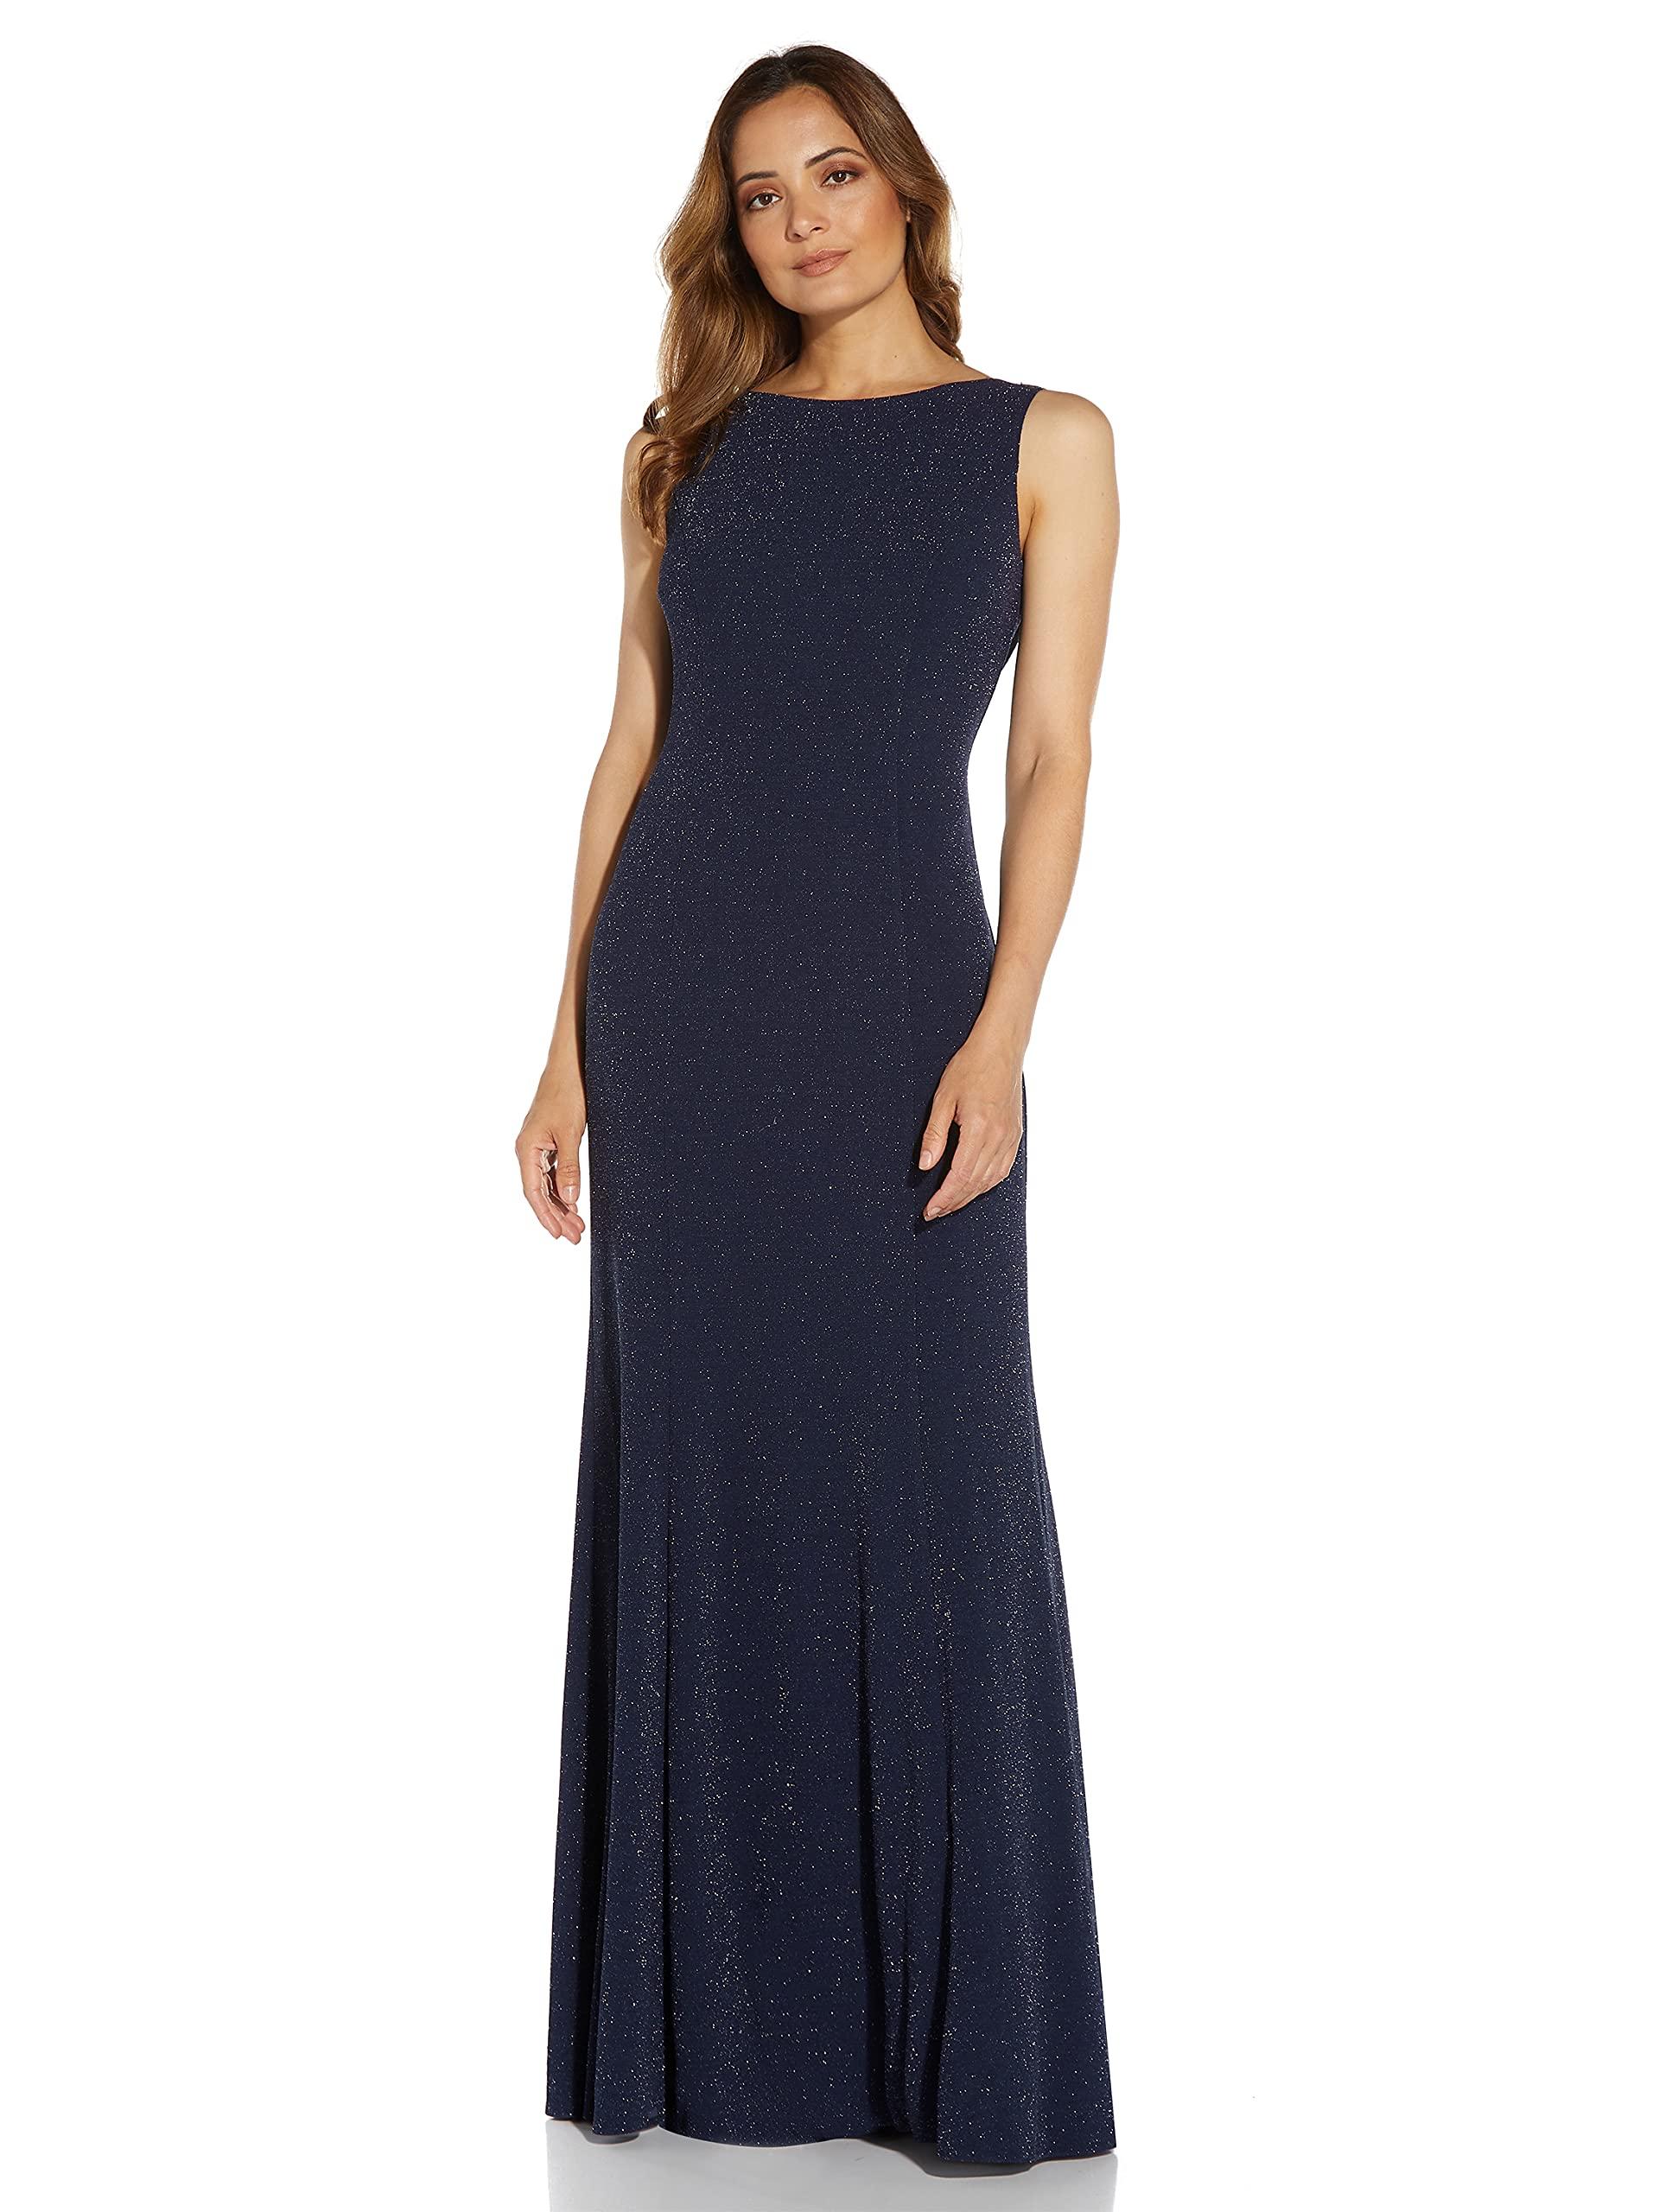 Adrianna Papell Metallic Knit Cowl Back Gown in Blue | Lyst